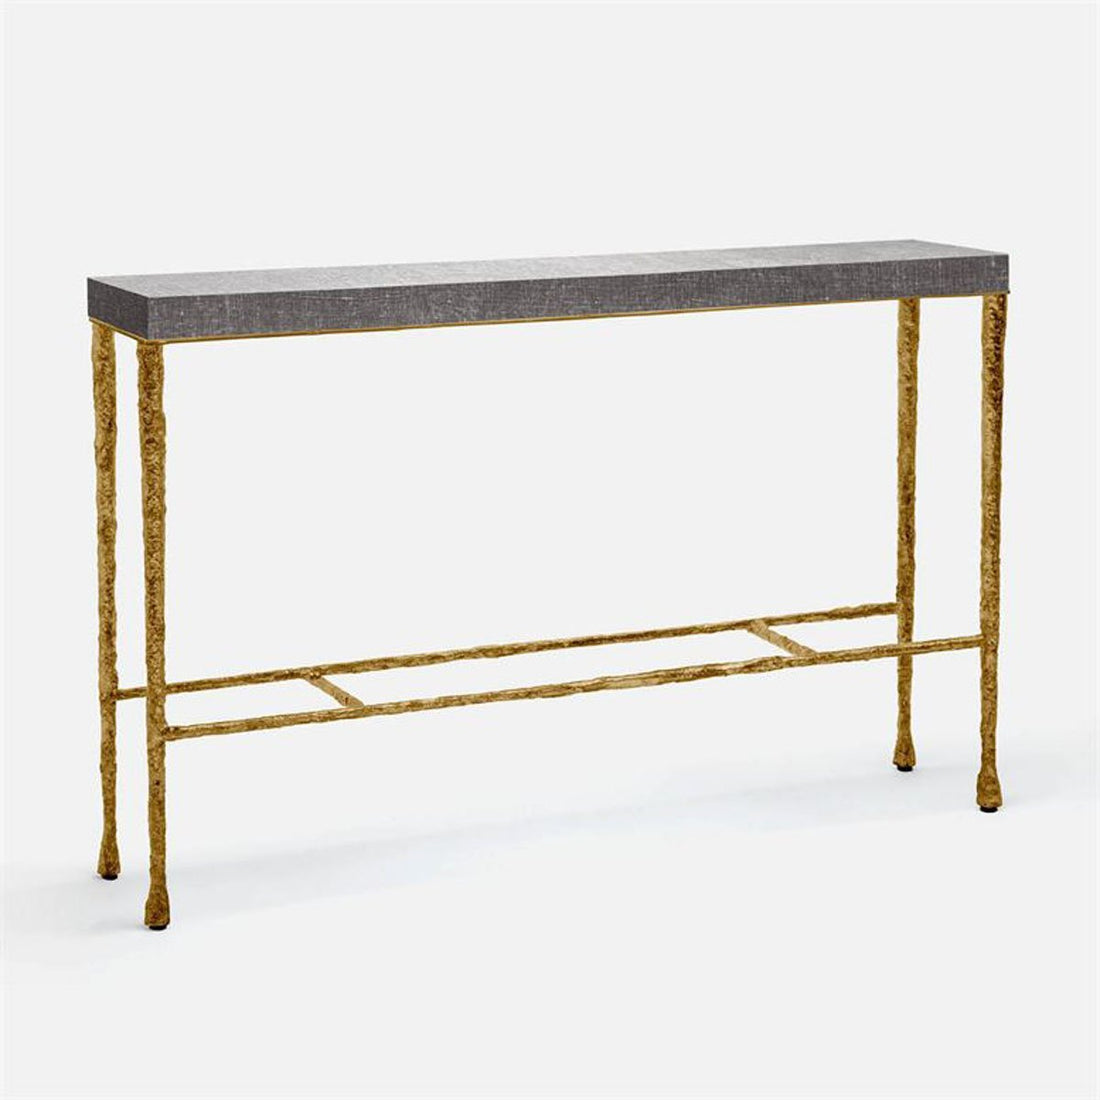 Made Goods Jovan Console Table in Beige Crystal Stone